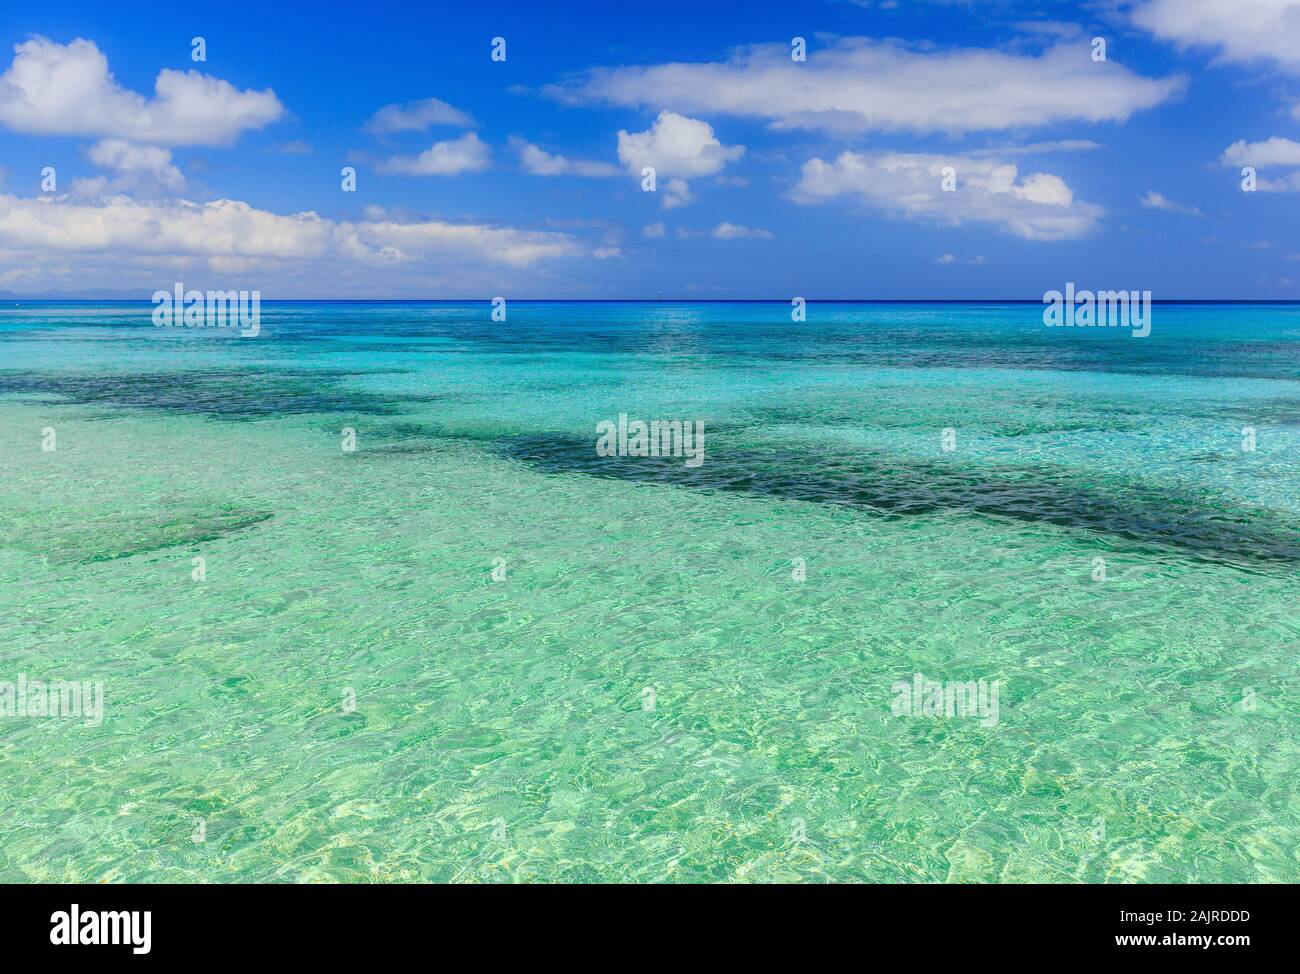 Apia, Samoa. Sky and clear turquoise water. Stock Photo